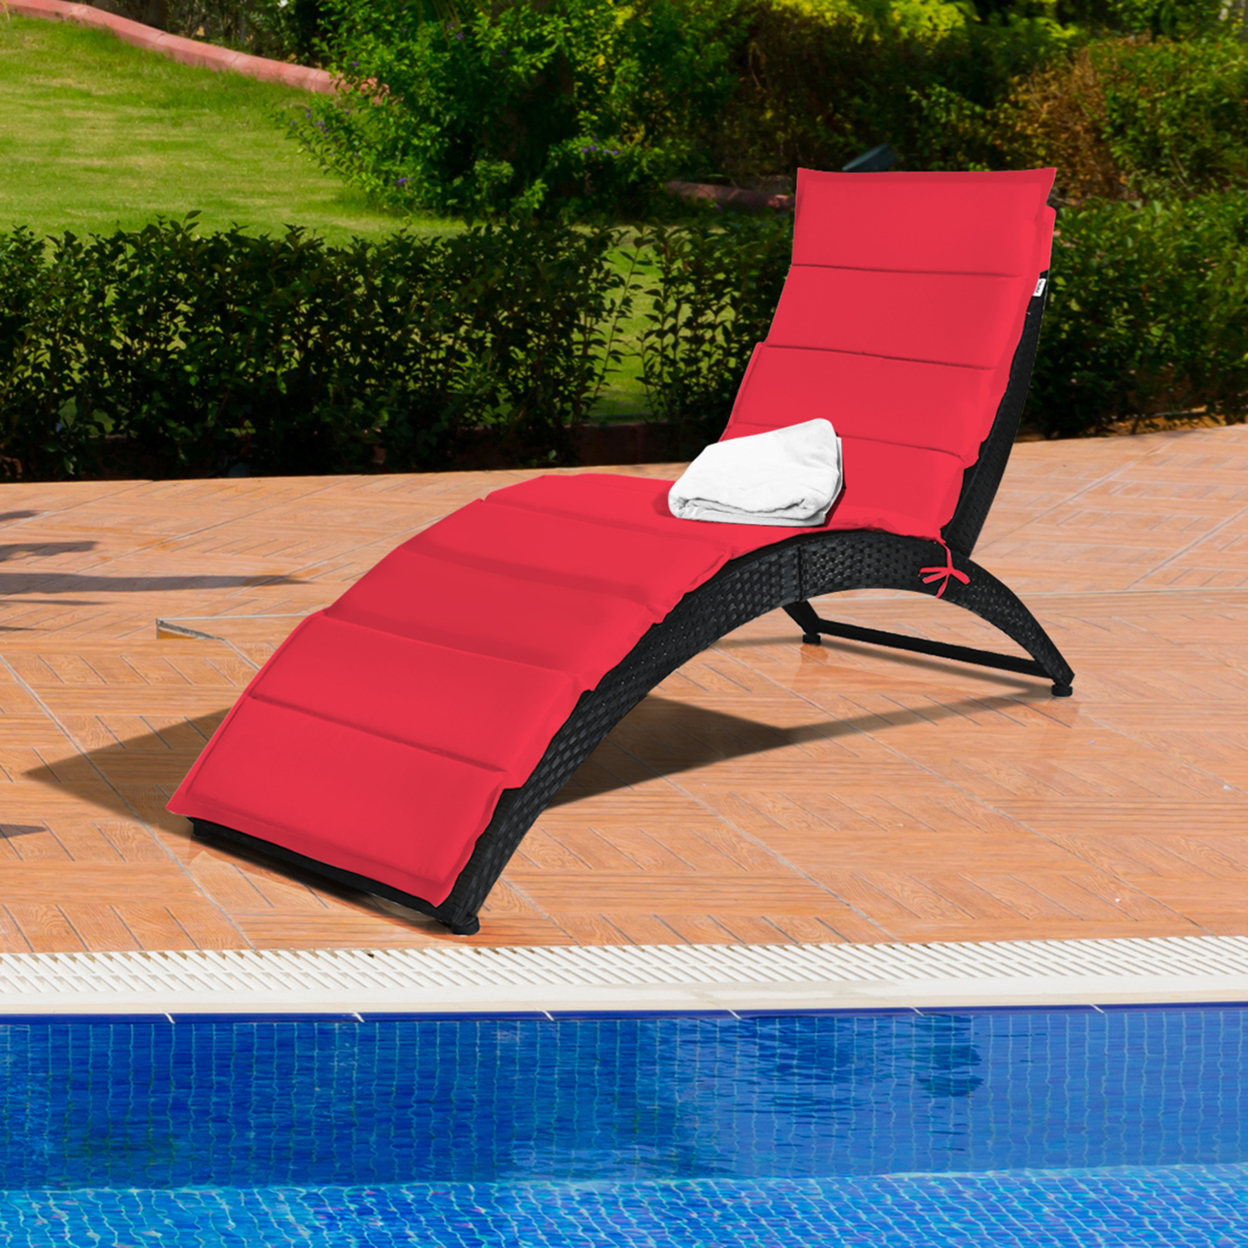 2PCS Foldable Rattan Wicker Chaise Lounge Chair W/ Red Cushion Patio Outdoor